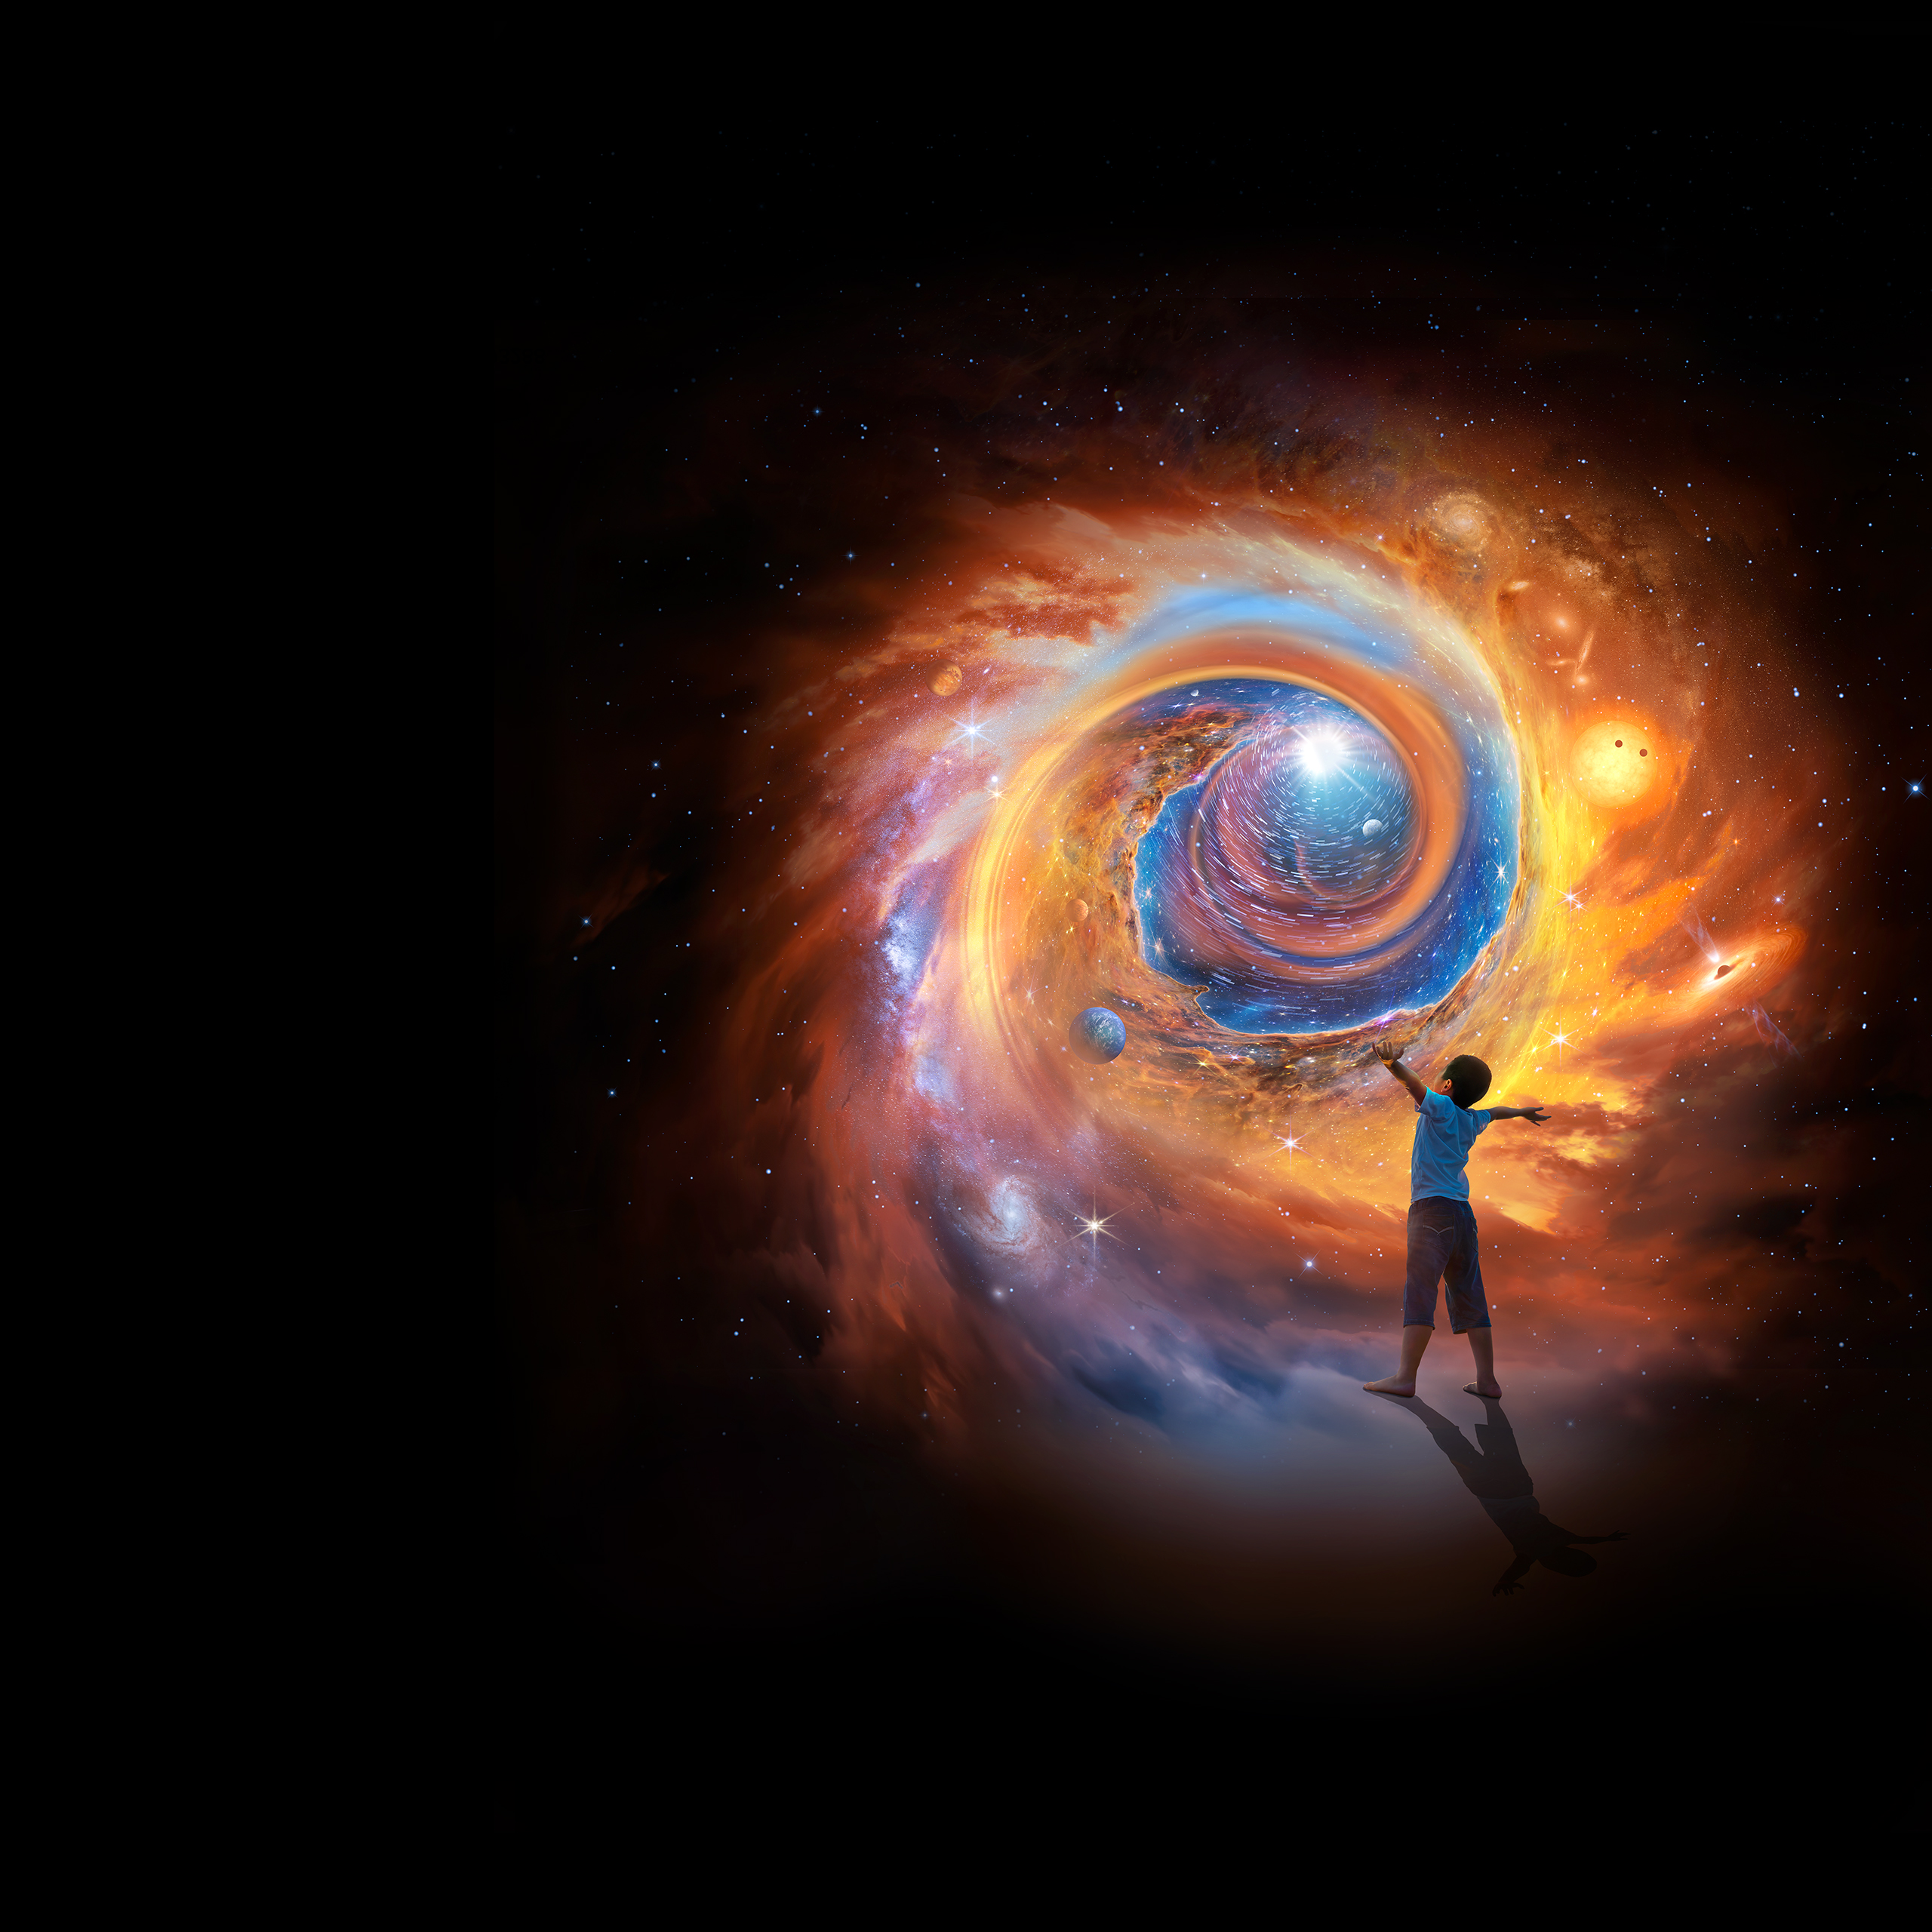 An artist’s concept – composed of reds, oranges, and blues accents – depicting swirling vortex of gasses, nebula, galaxies, stars, and exoplanets. These elements spiral inward toward a central glowing light. This light represents the origin of our Universe, or the “big bang.” The inner portion of the spiral was created from a section of the Carina Nebula, also known as the “Cosmic Cliffs,” captured by the Webb Space Telescope in 2022. A young boy stands at bottom right in the foreground with arm outstretched, and gazes up at the central light source.